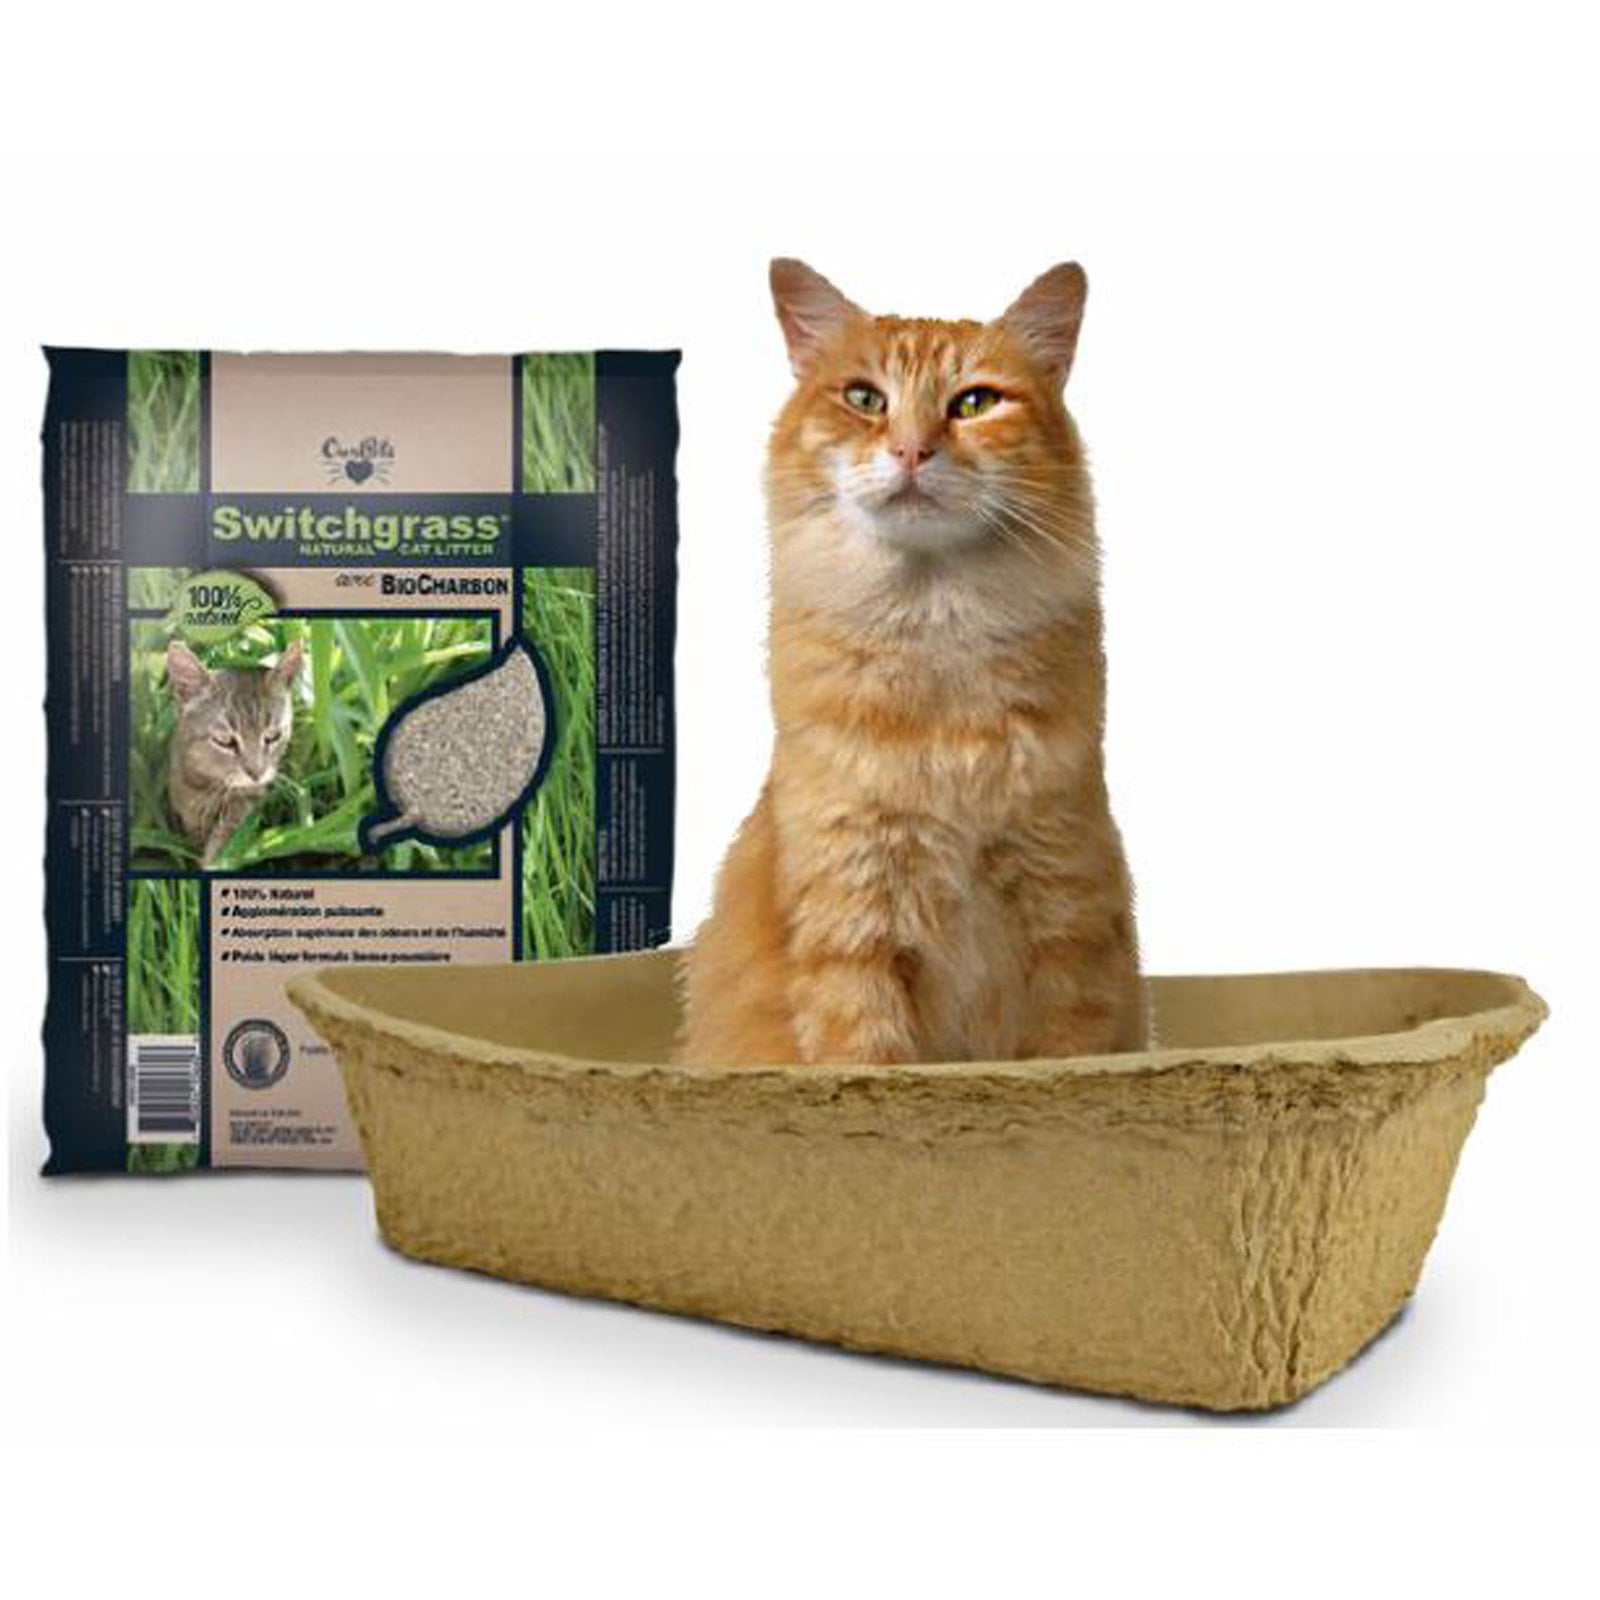 Pet Zone 3 Disposable Litter Boxes with Switchgrass Cat Litter